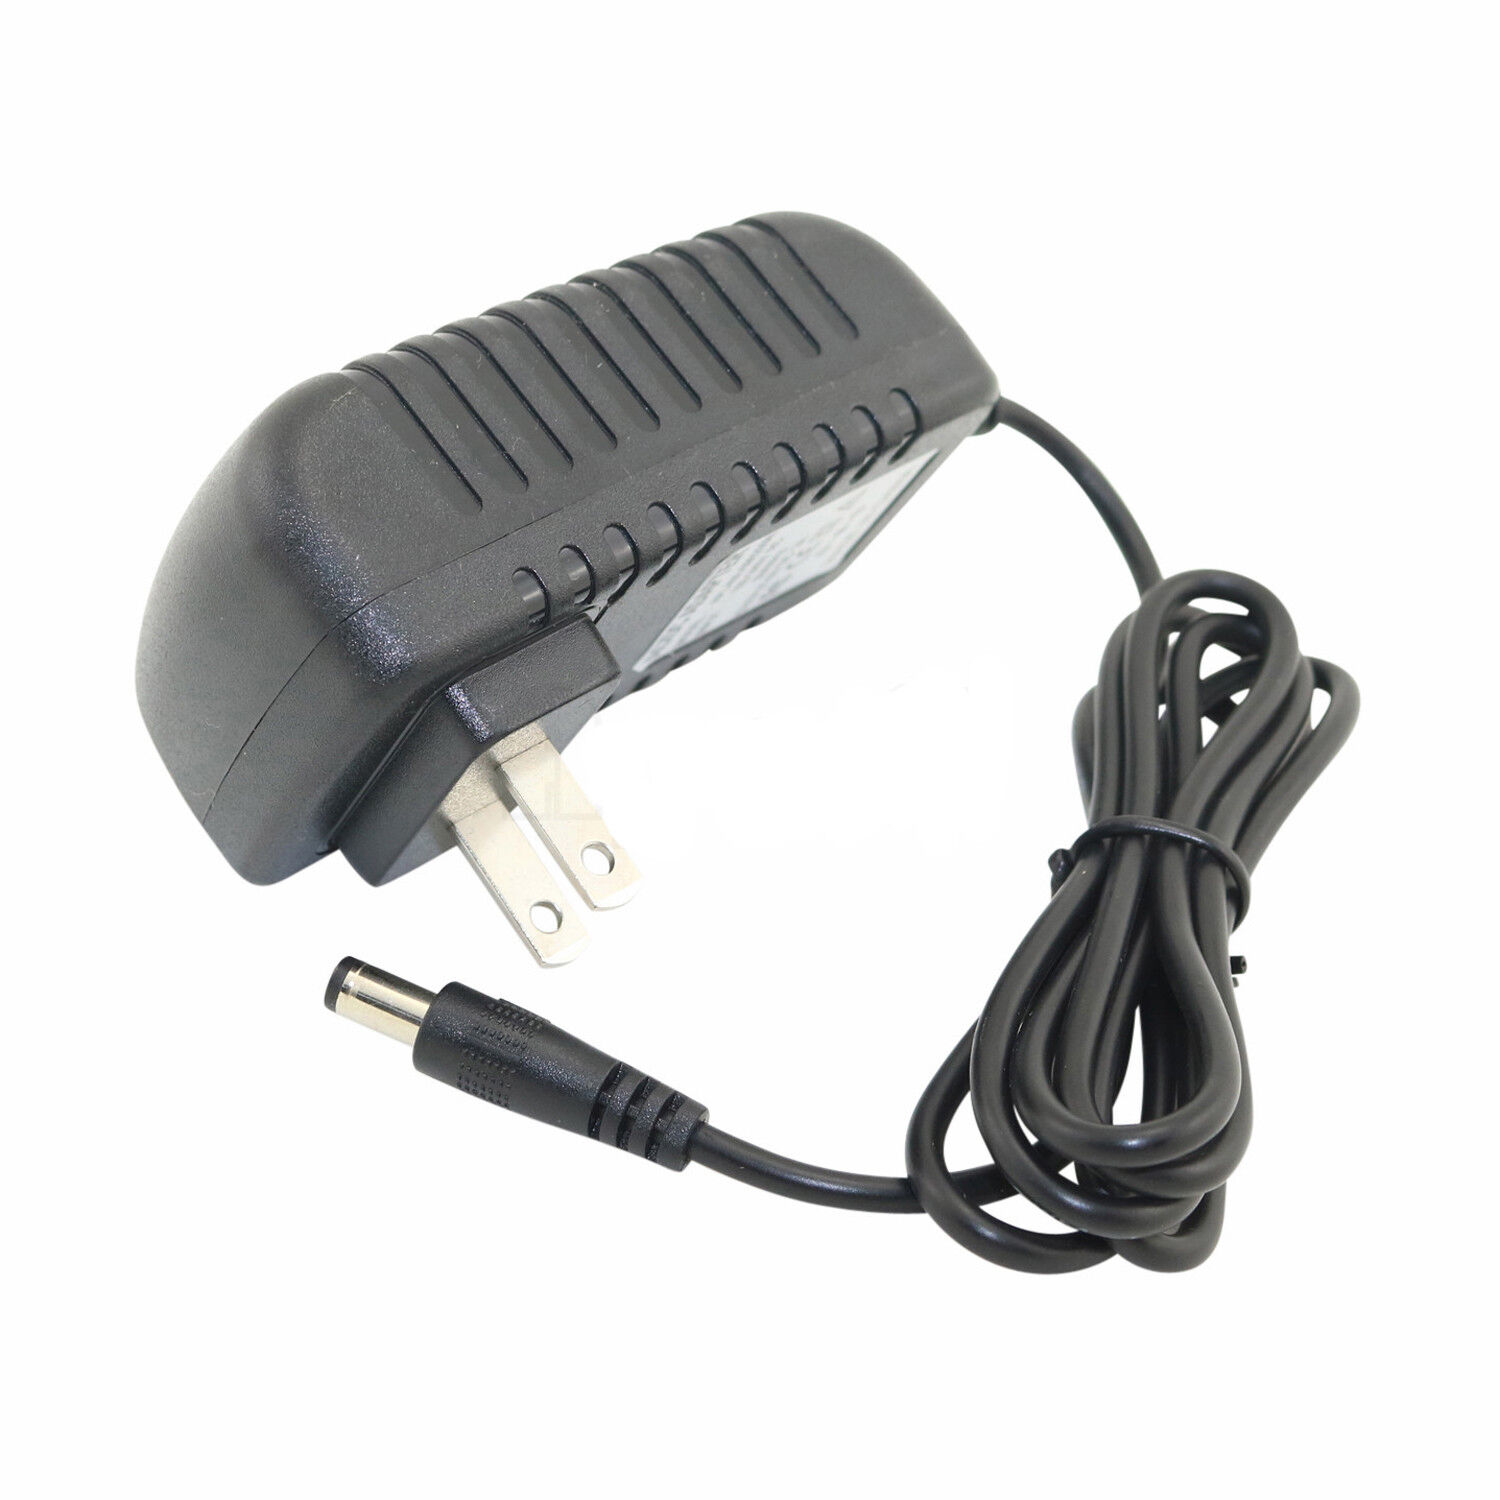 For AirRam K9 Multi Mk2 Vacuum Cleaner 27V Portable Power Charger Adapter Cable 27V Portable Power Charger Adapter Cabl